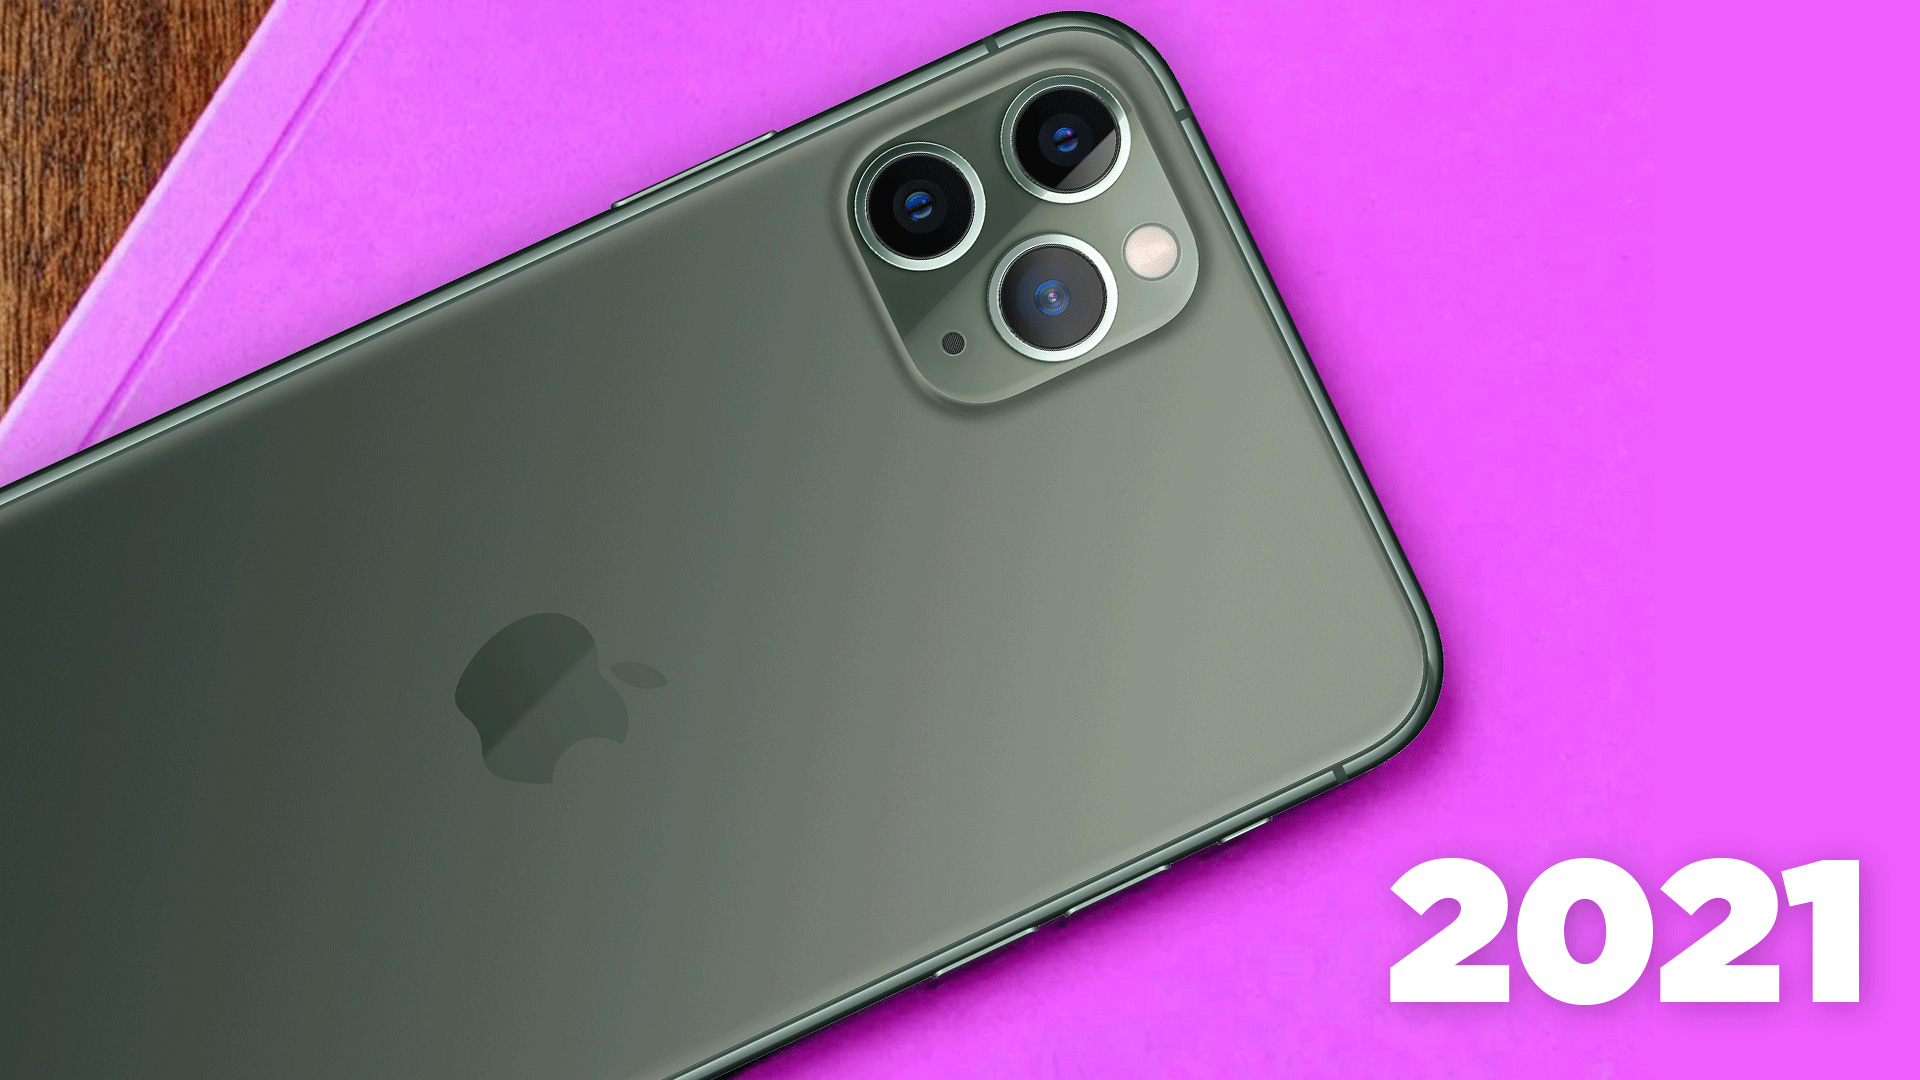 Why the iPhone 11 Pro Max in 2021?